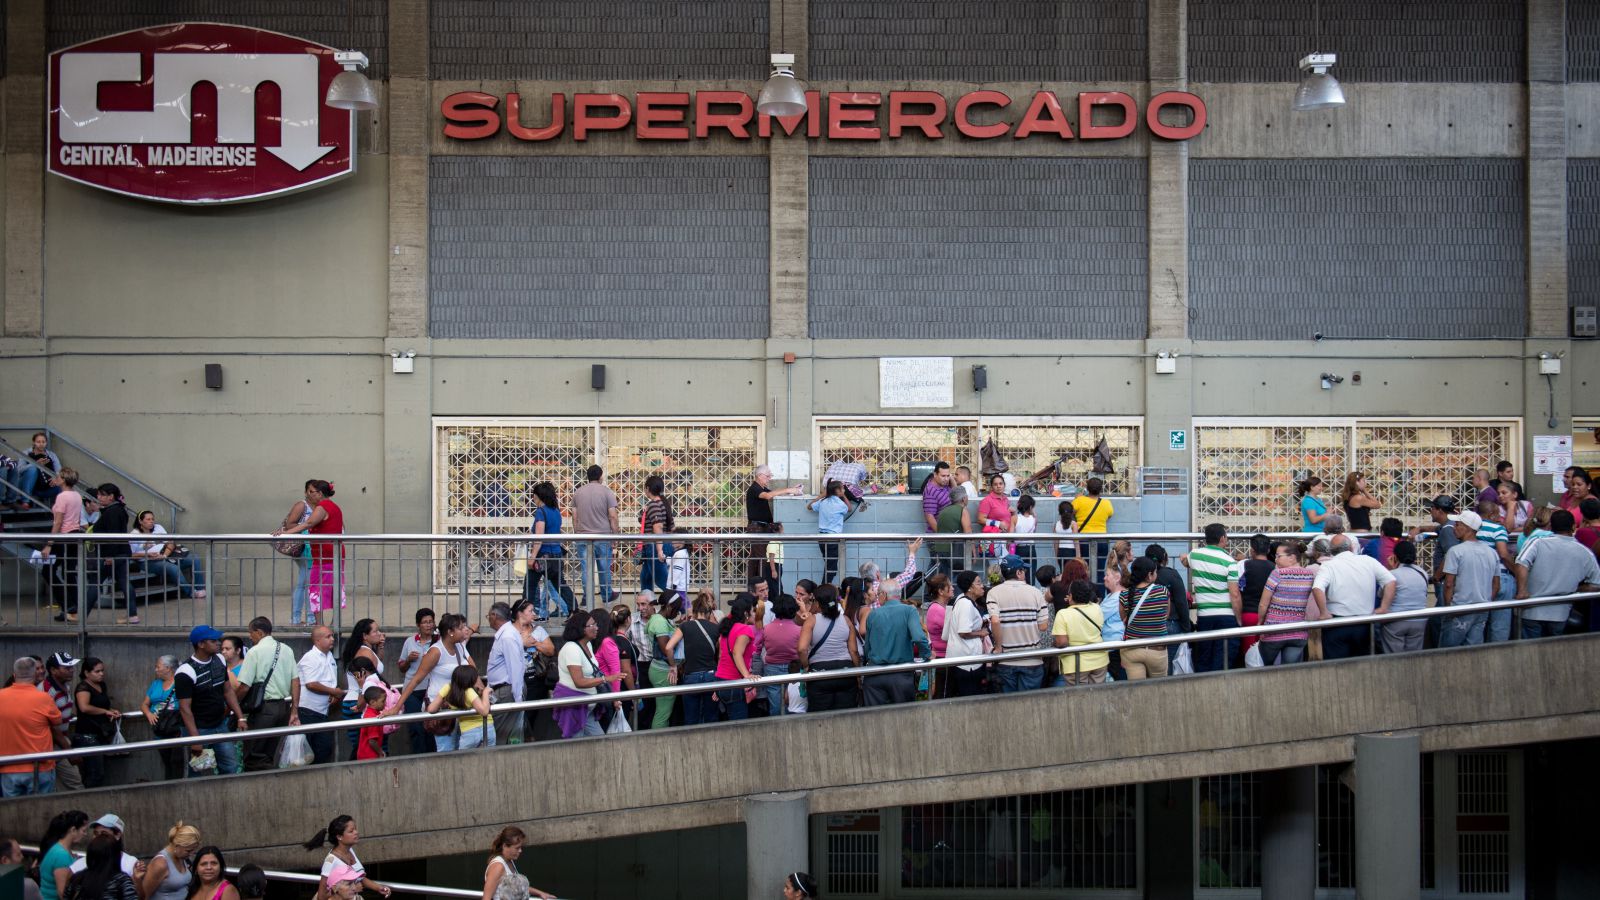 40% of retail stores in Venezuela go bankrupt as government mandates massive minimum wage hike that no employer can afford